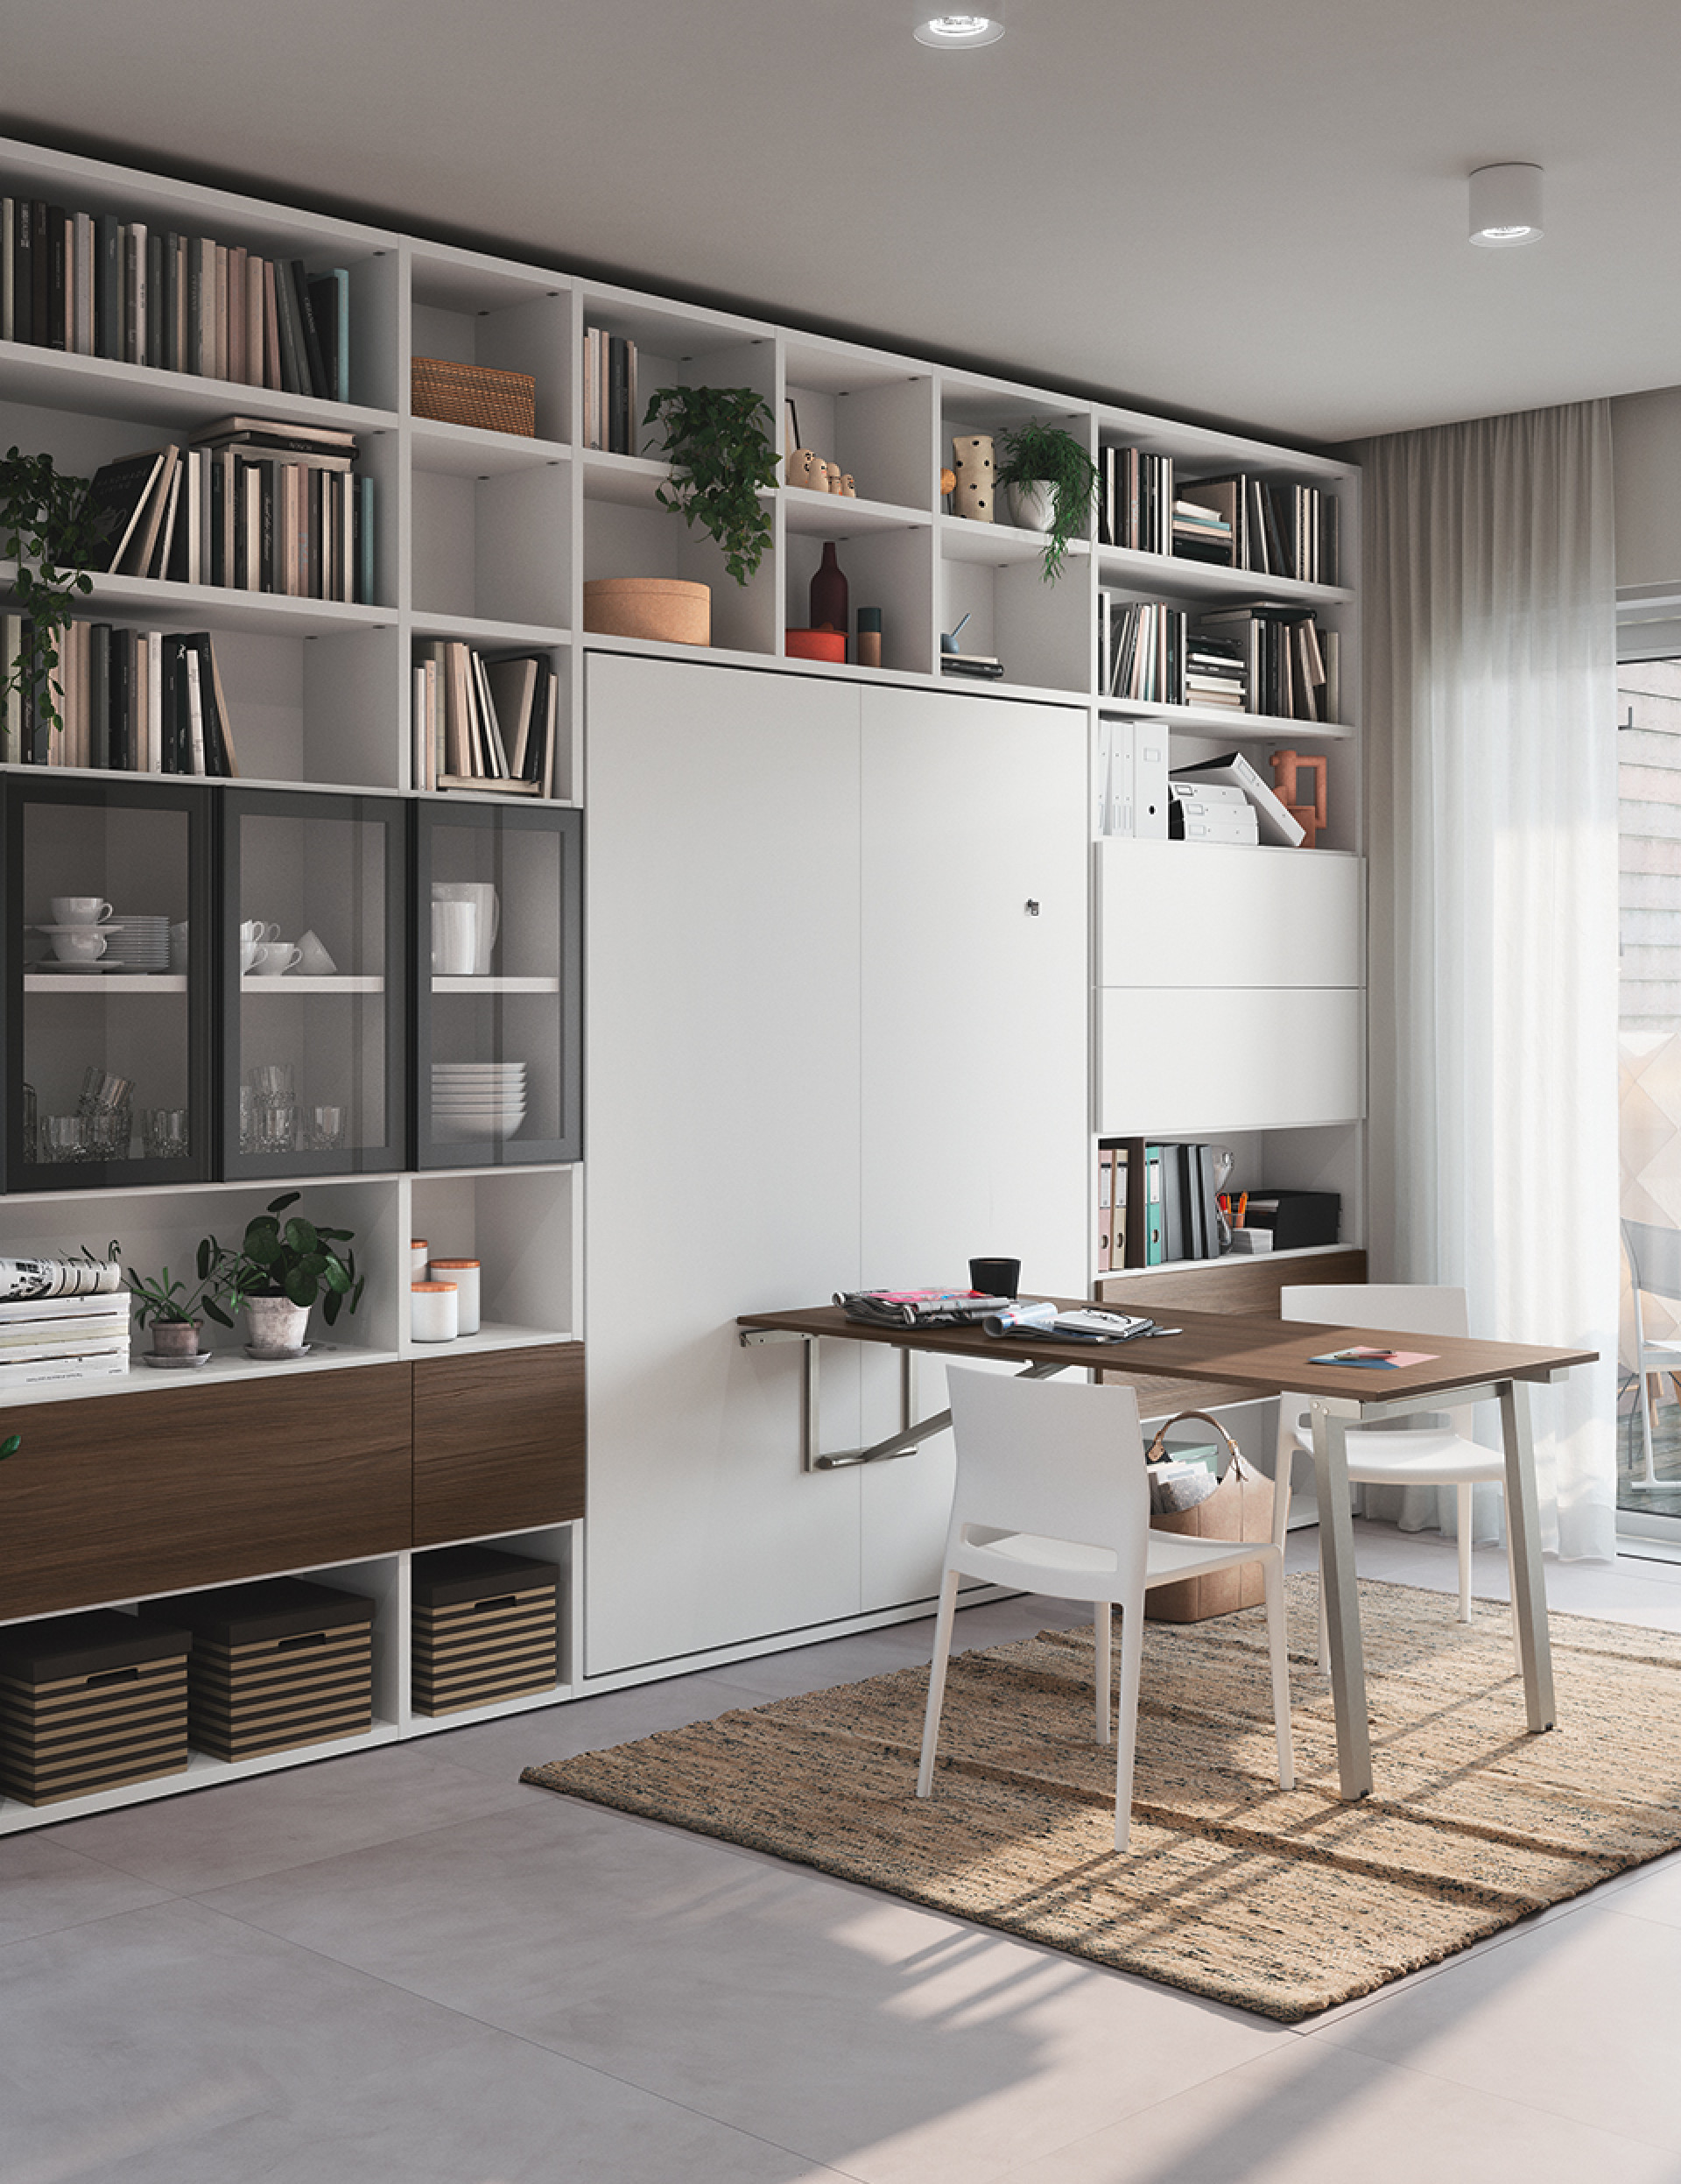 Redesigning the identity of a studio apartment